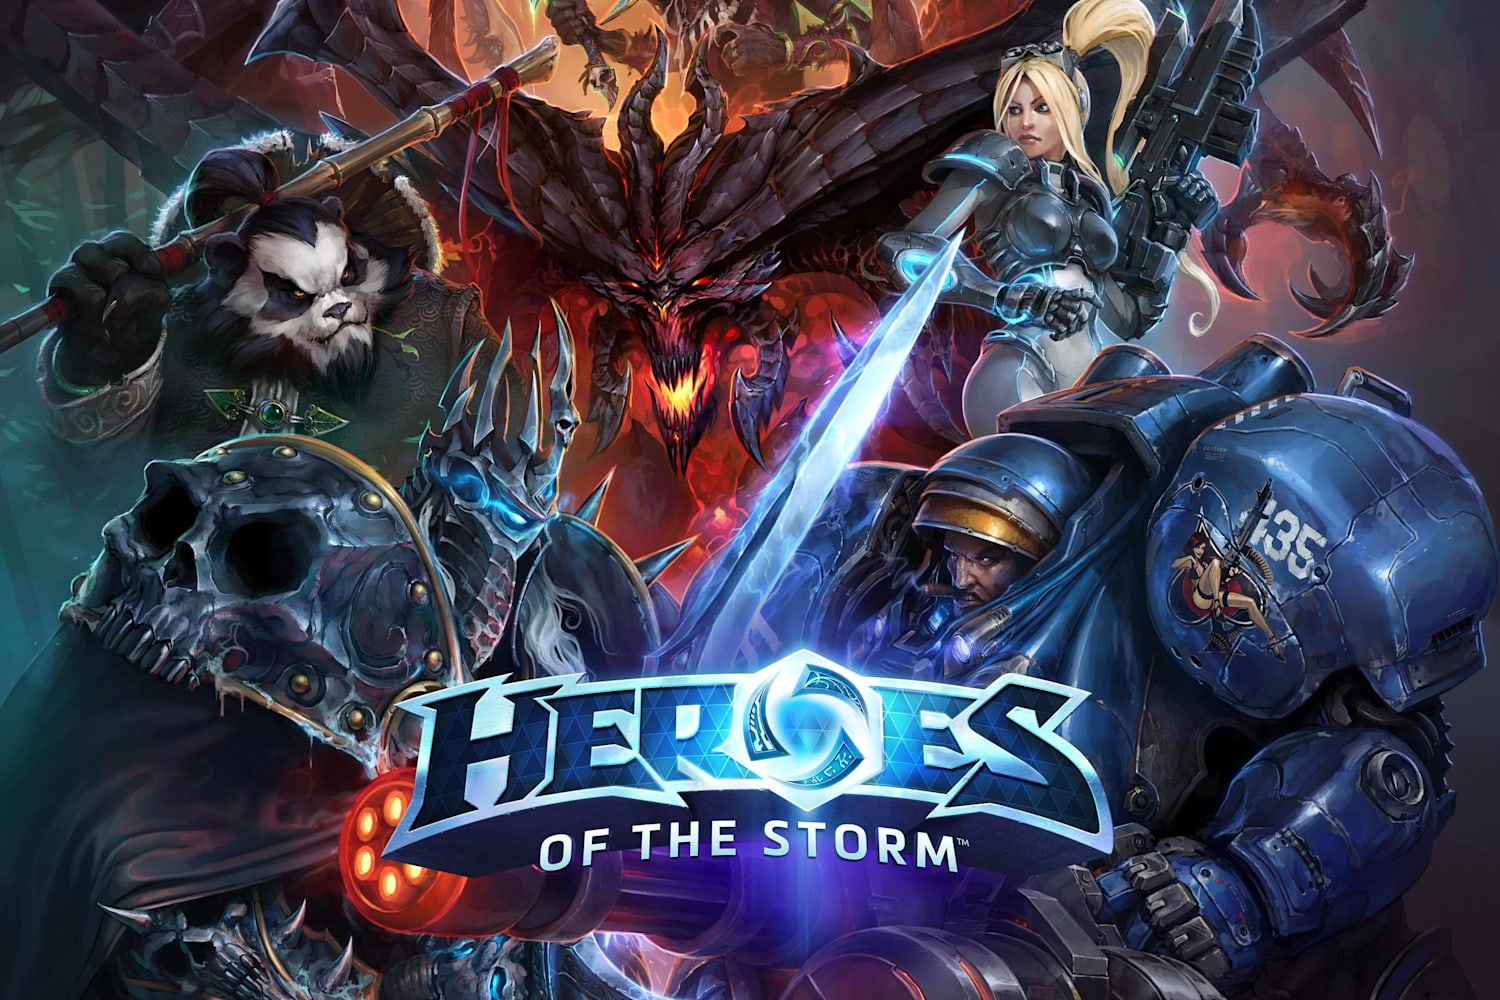 Hots ps4. Игра Heroes of the Storm. Heroes of the Storm от Blizzard. Хиро оф зе шторм. Хотс моба.